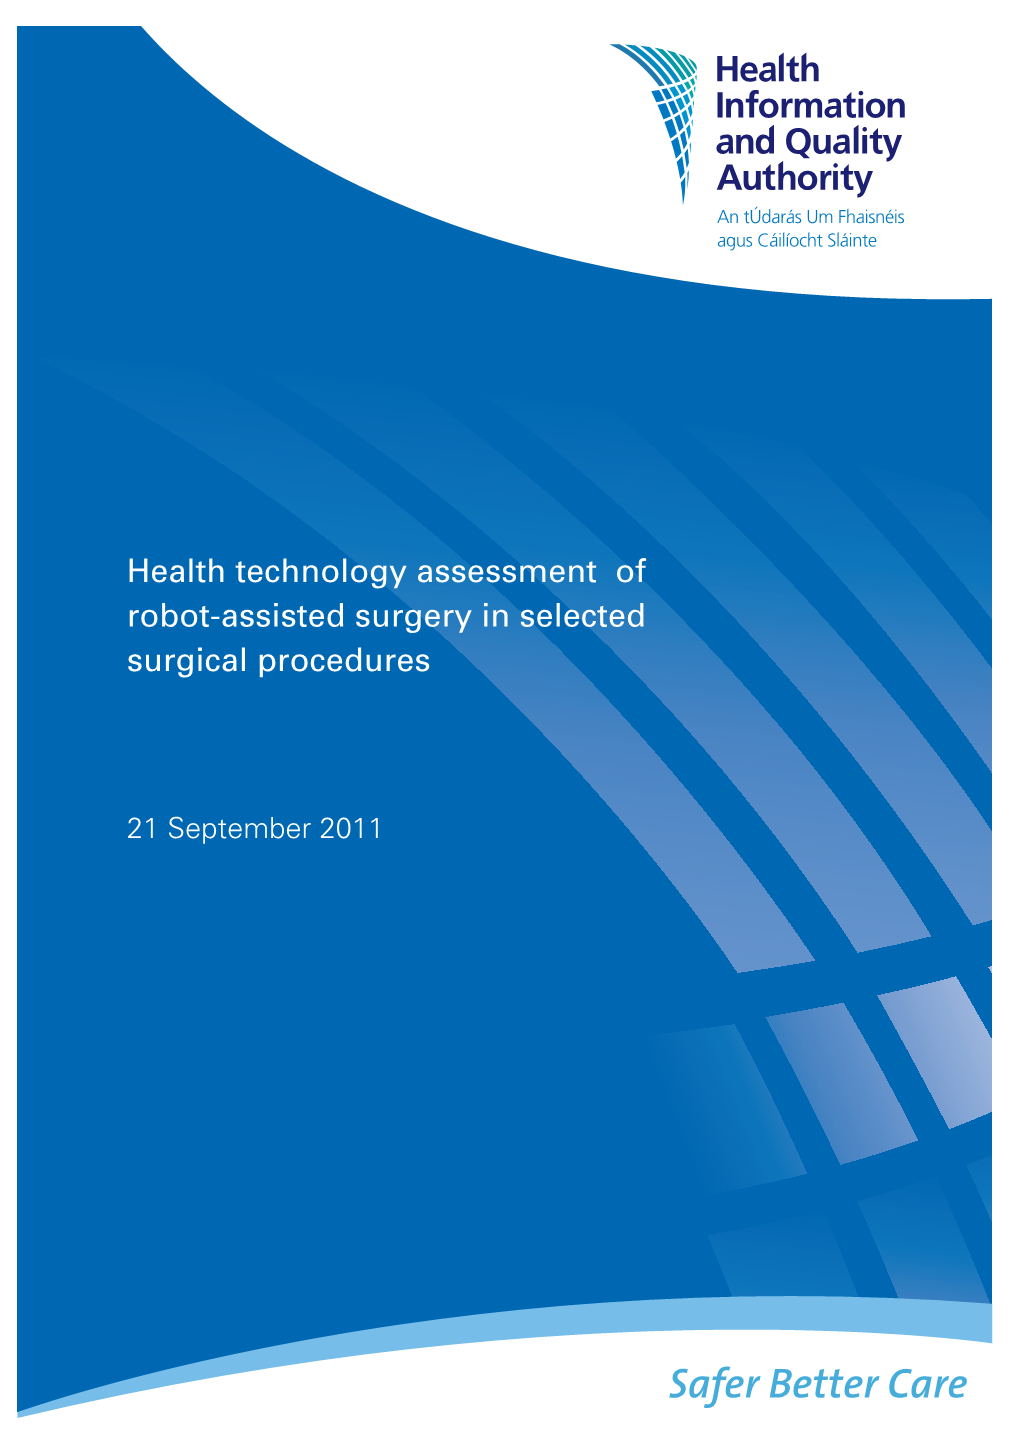 Health Technology Assessment of Robot-Assisted Surgery in Selected Surgical Procedures